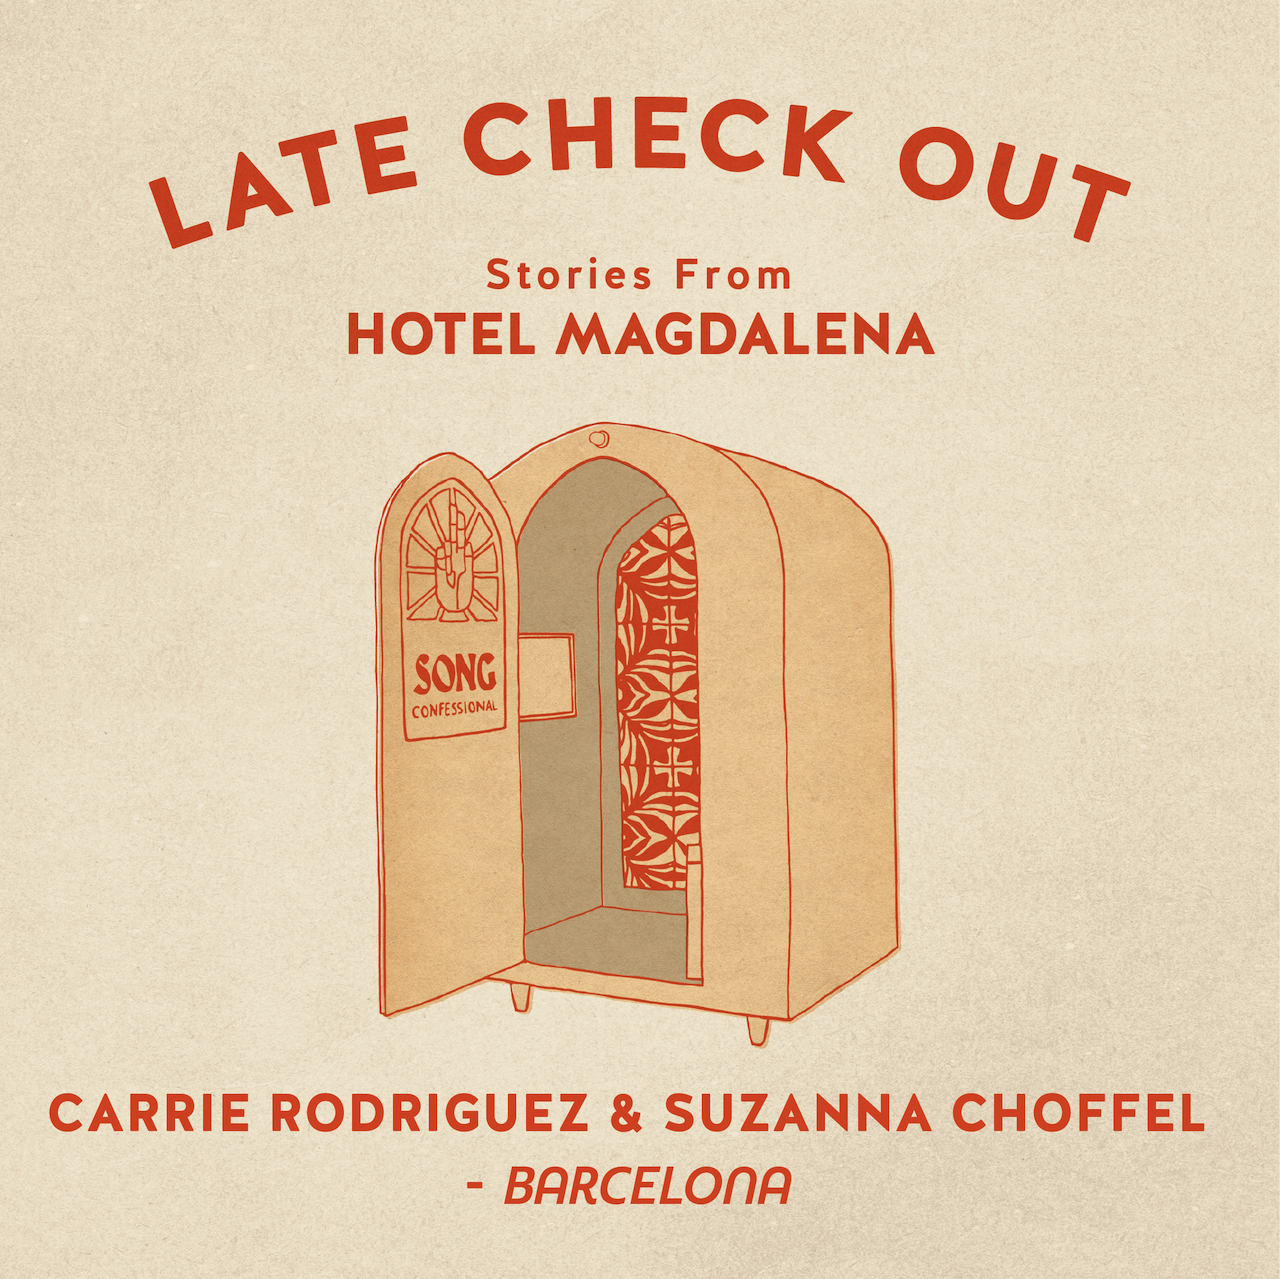 Carrie Rodriguez and Suzanna Choffel – Barcelona